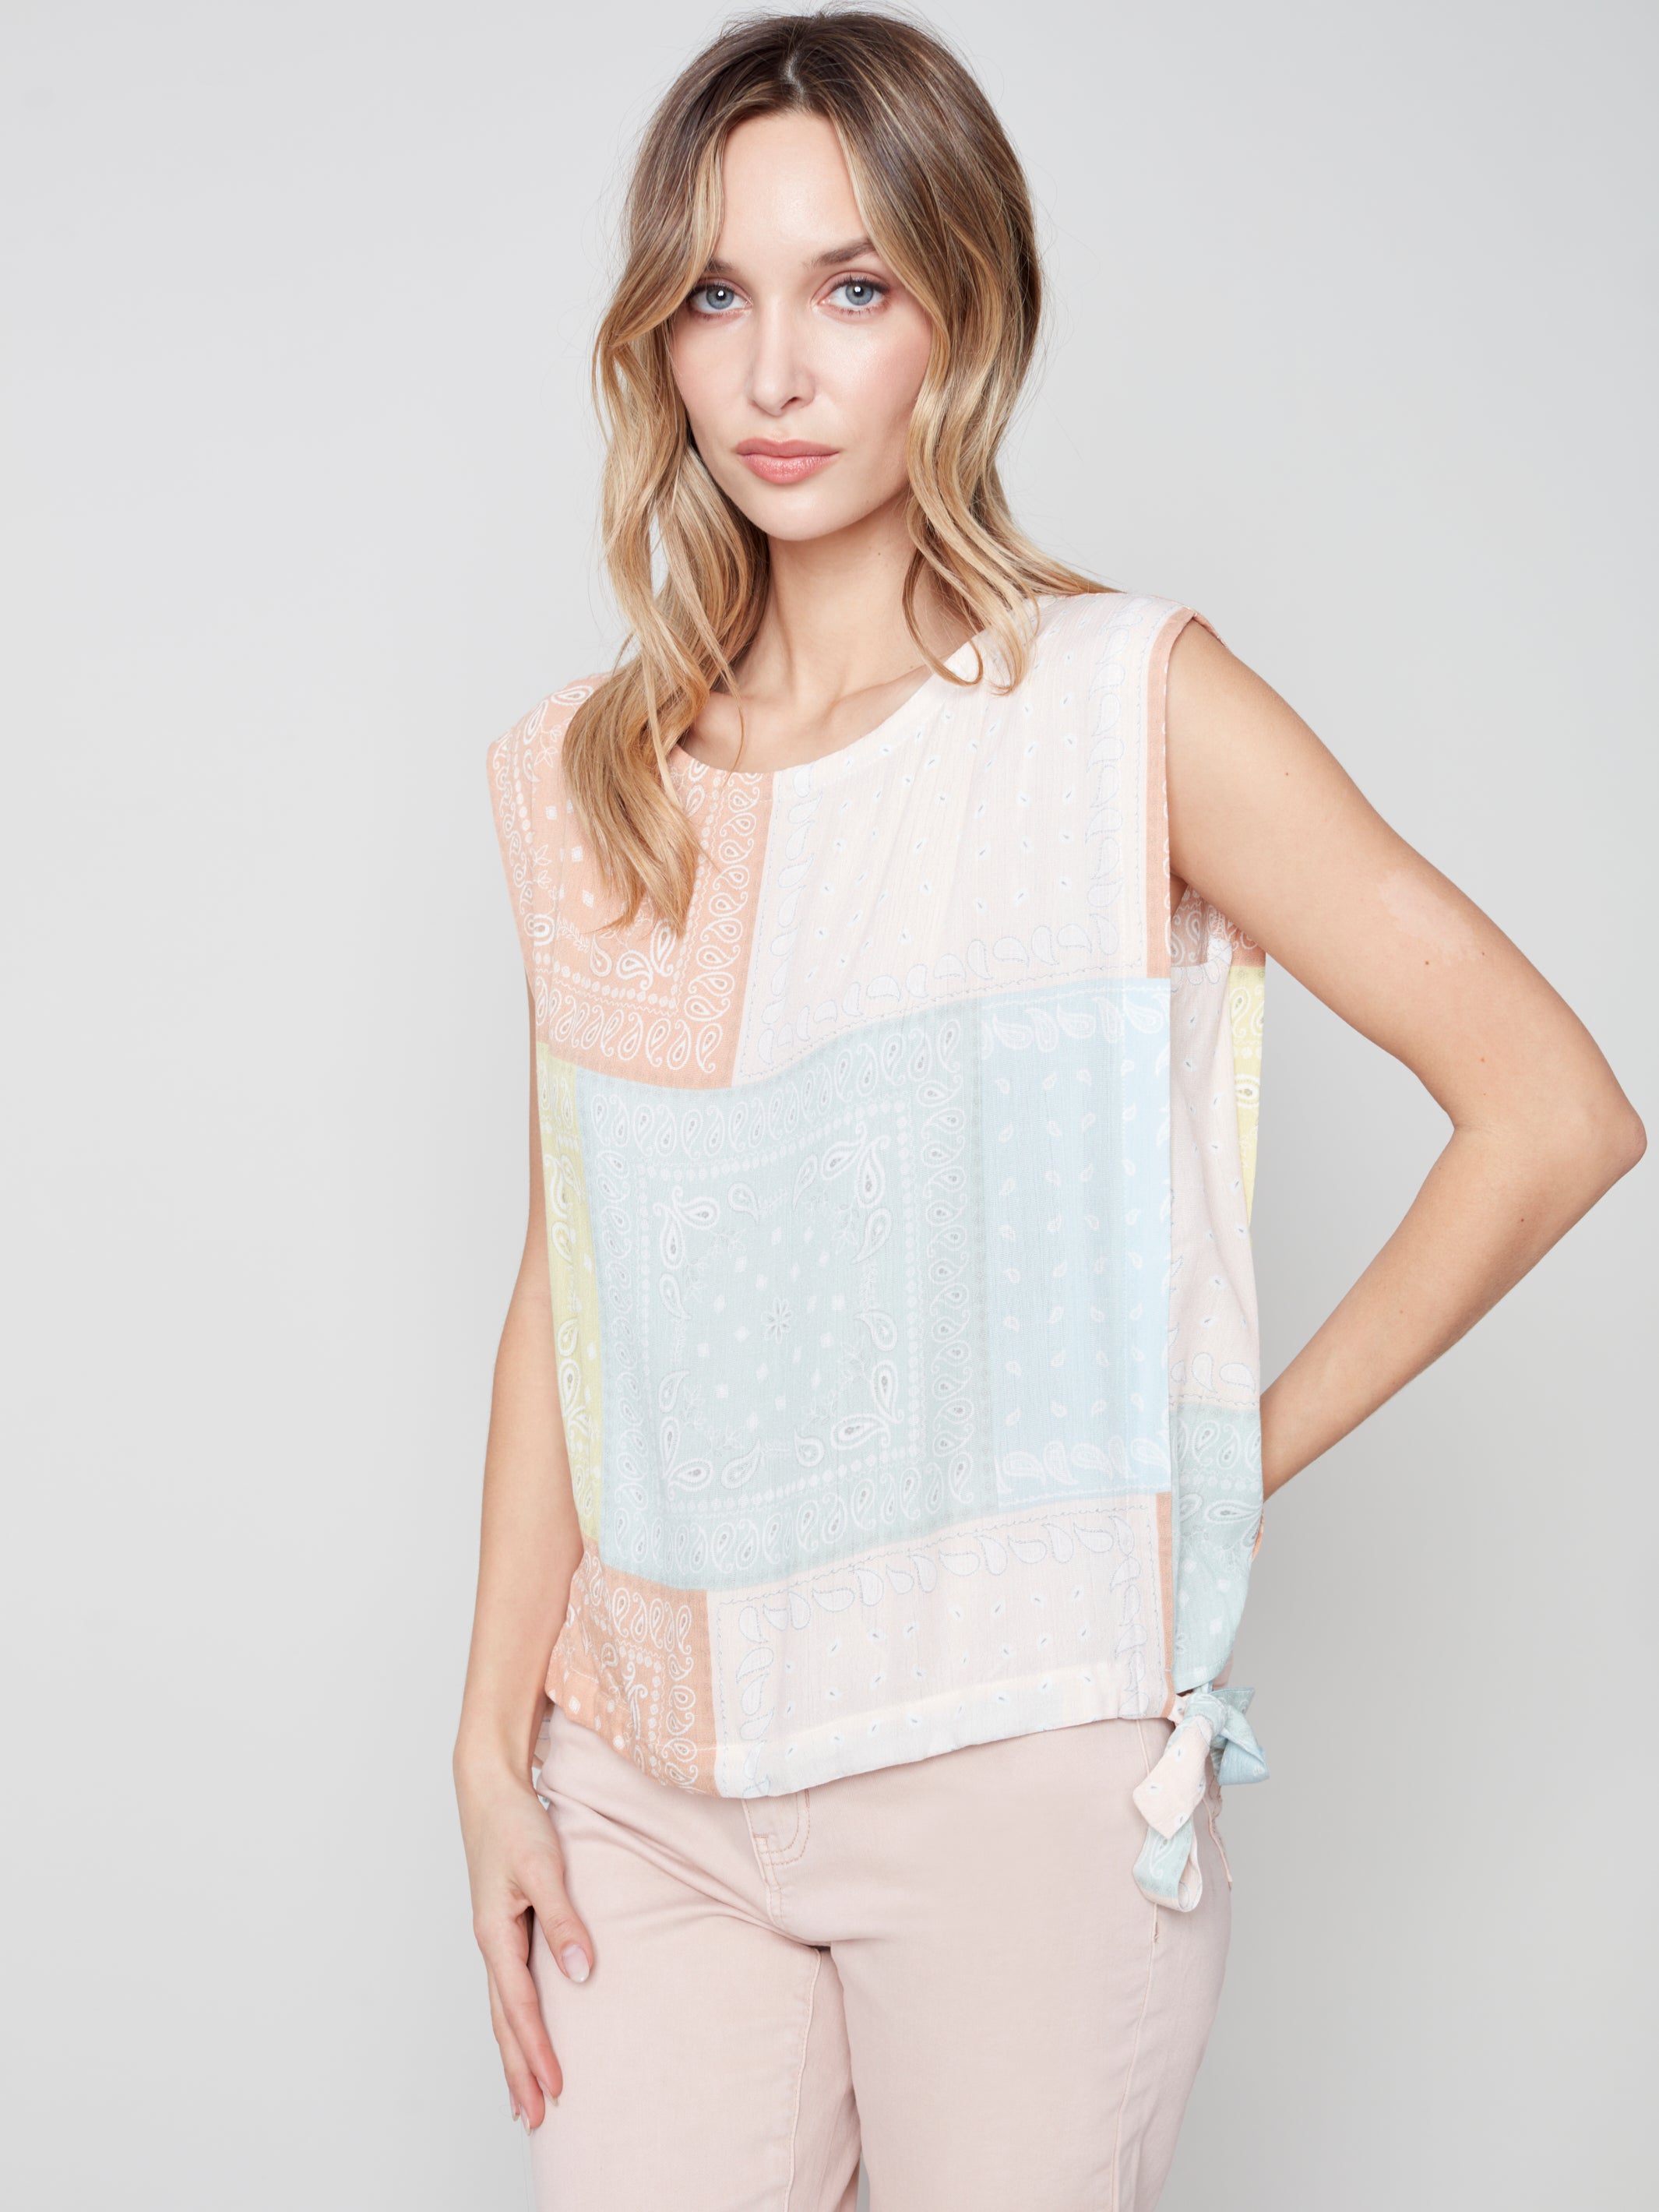 Patchwork Print Sleeveless Top by Charlie B